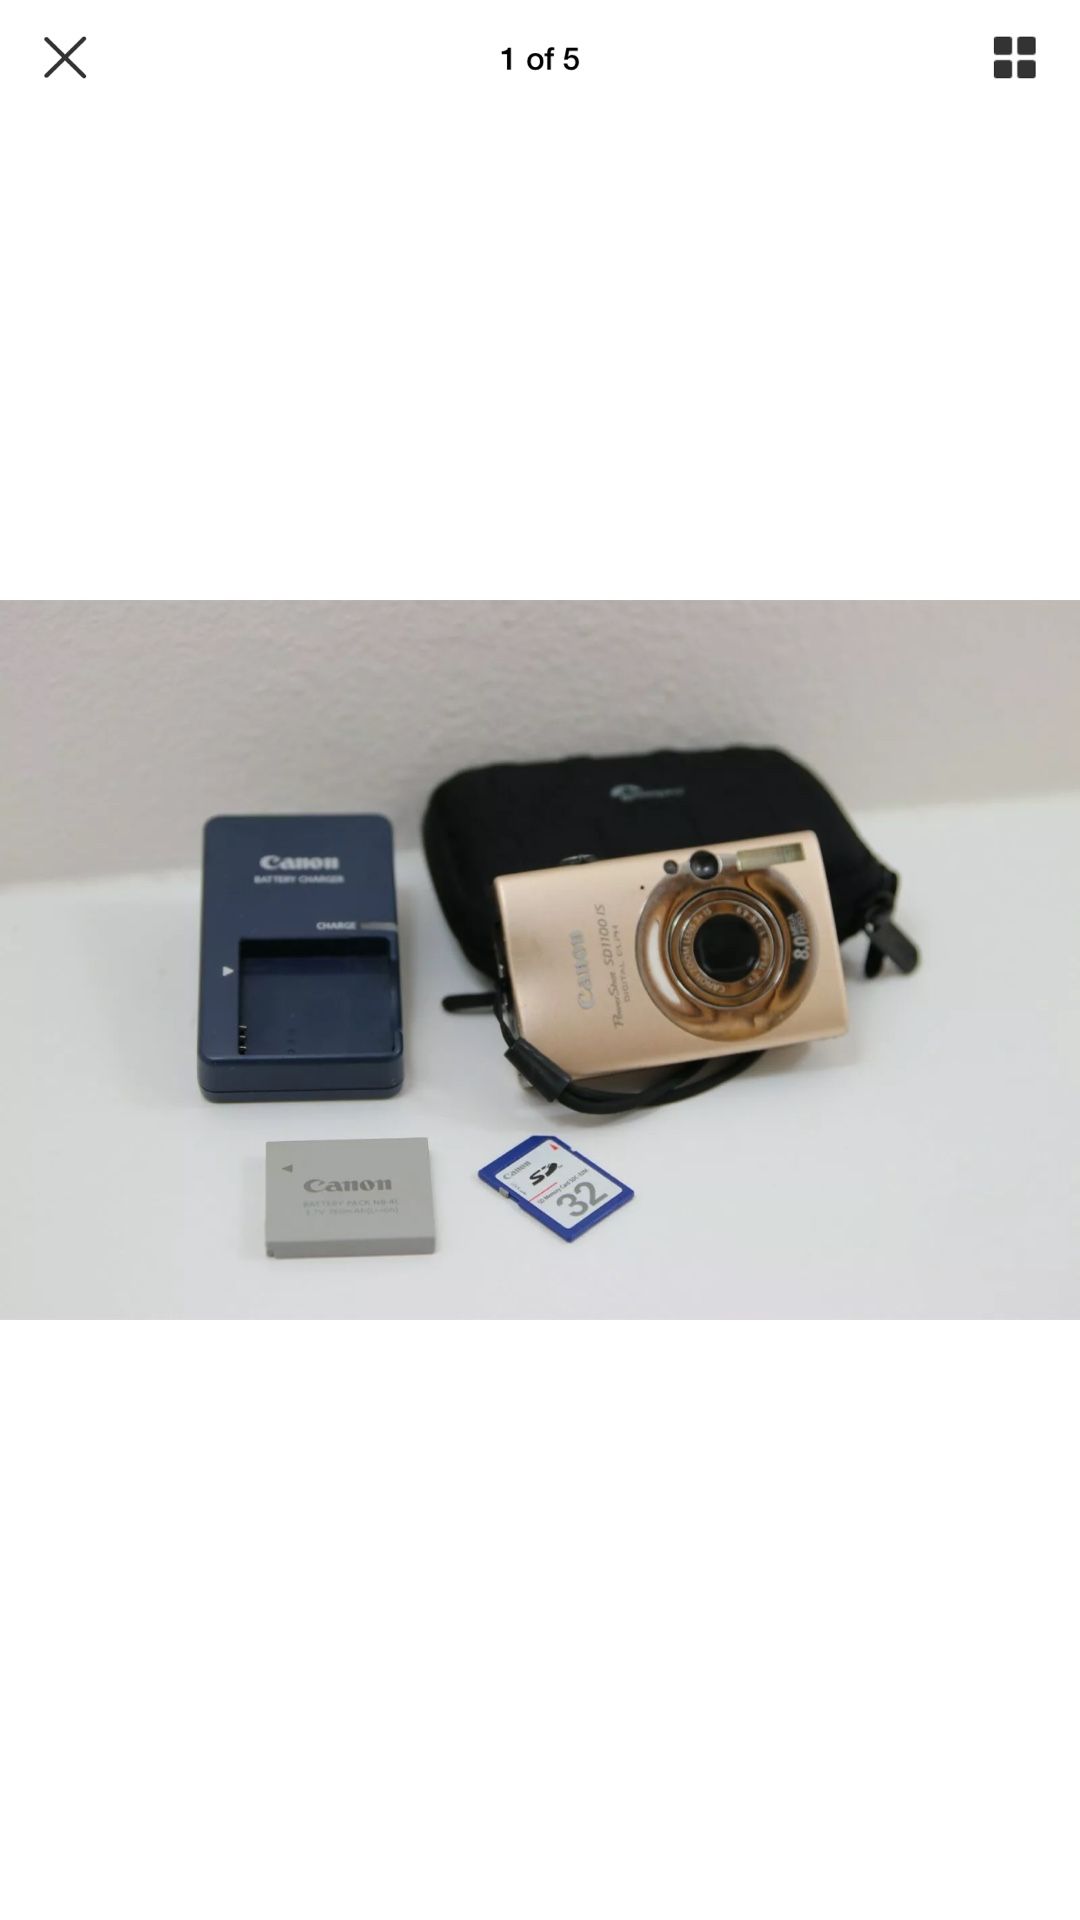 Canon PowerShot Digital ELPH SD1100 IS Camera 8 mega pixels With 32MB SD Card